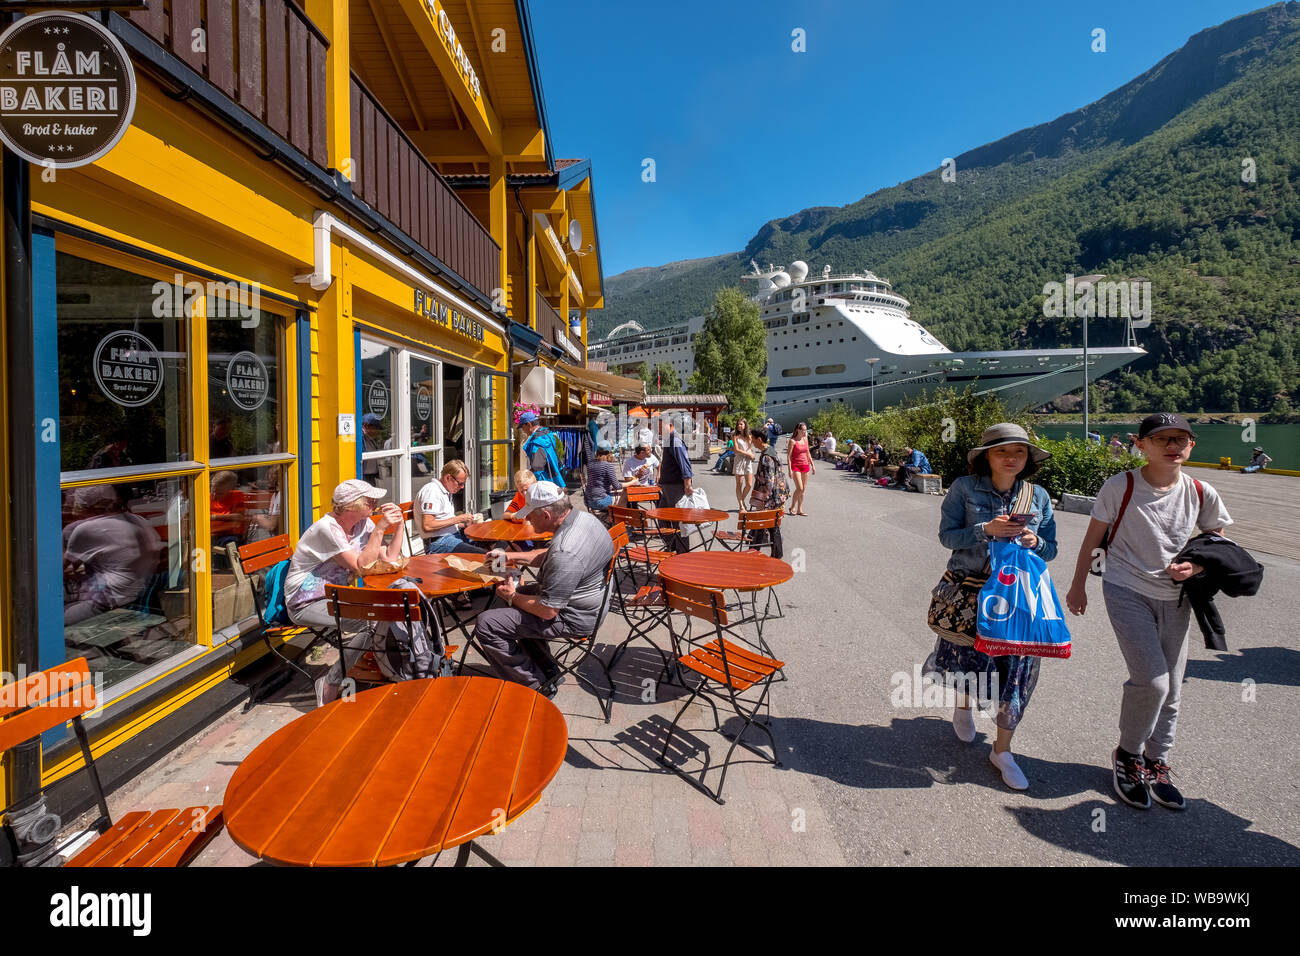 Tourists in Flåm, FABRIK KUTSALG FACTORY OUTLET, café, yellow wooden house, excursion ship, fjord, mountain, trees, blue sky, Sogn og Fjordane, Norway Stock Photo